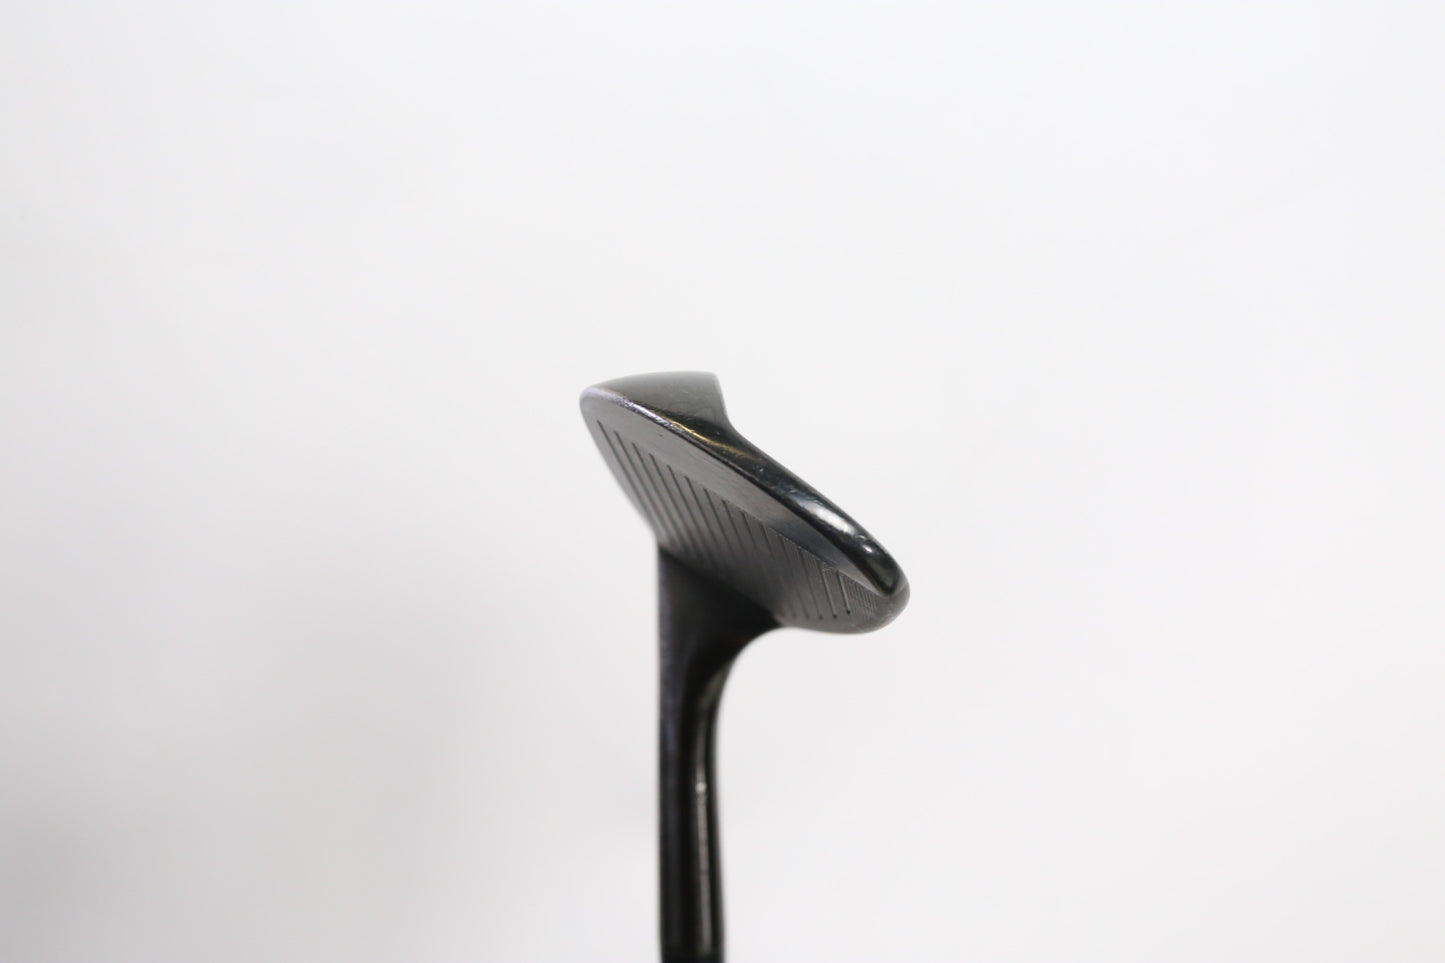 Used Cleveland 588 Forged Black Pearl Sand Wedge - Right-Handed - 56 Degrees - Stiff Flex